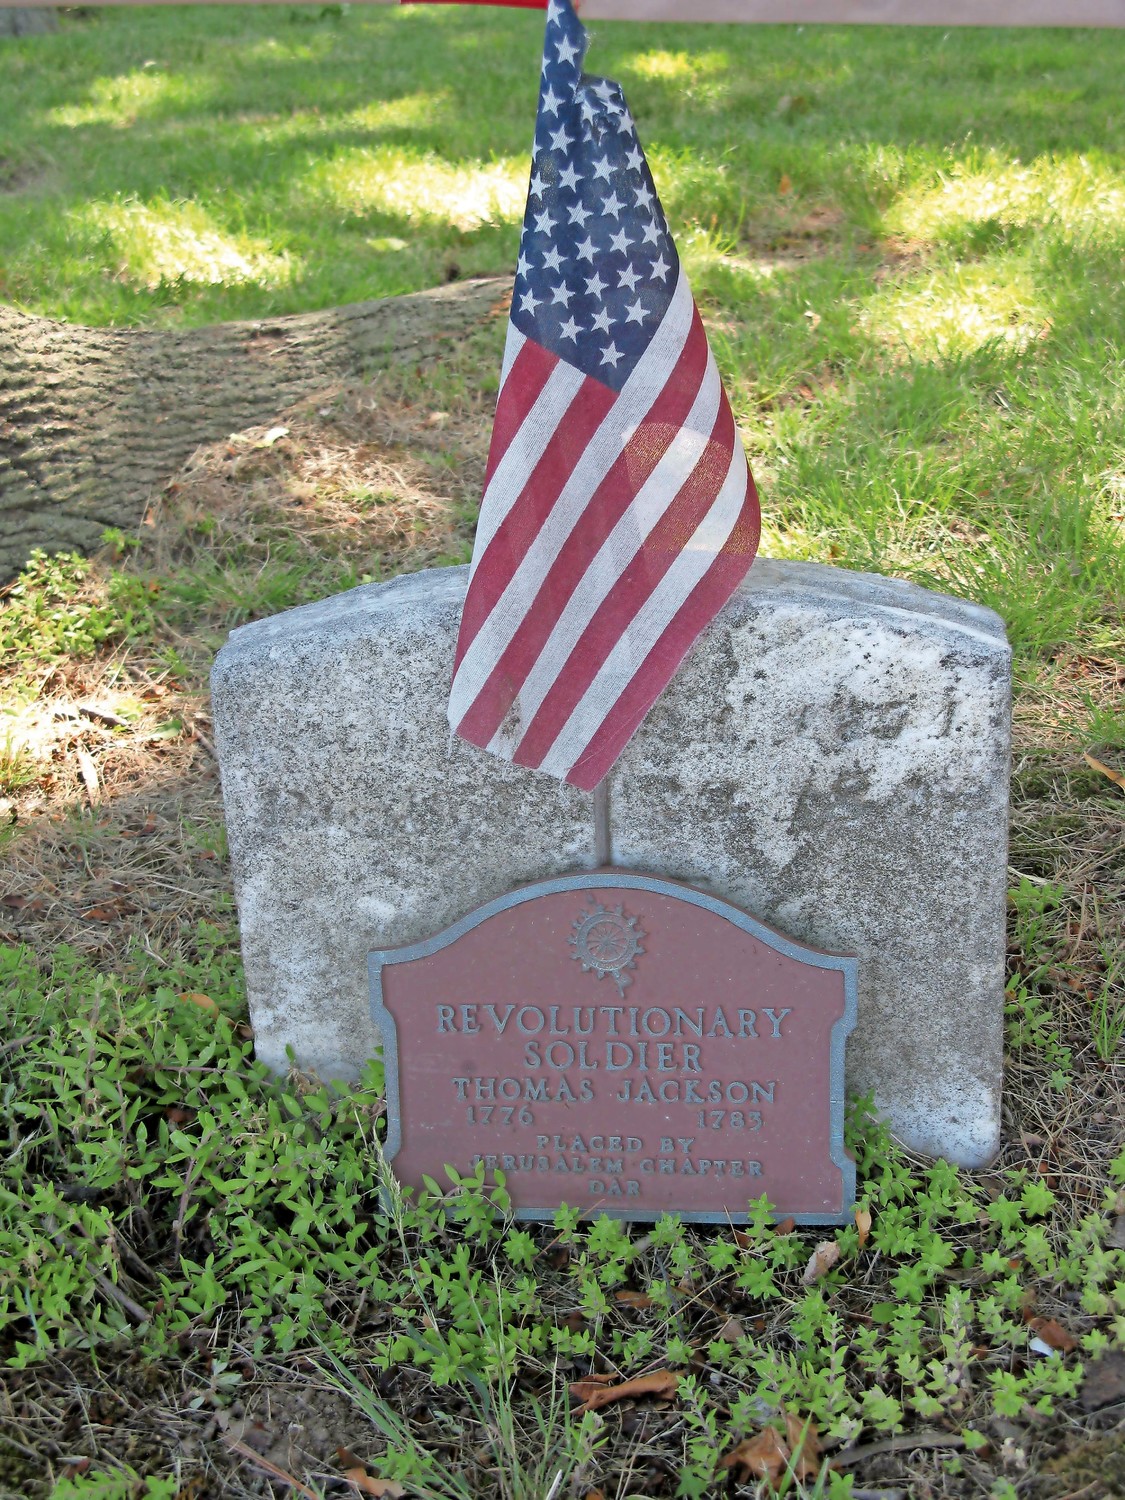 Thomas Jackson, a Revolutionary War soldier, is buried in the Jackson Cemetery.